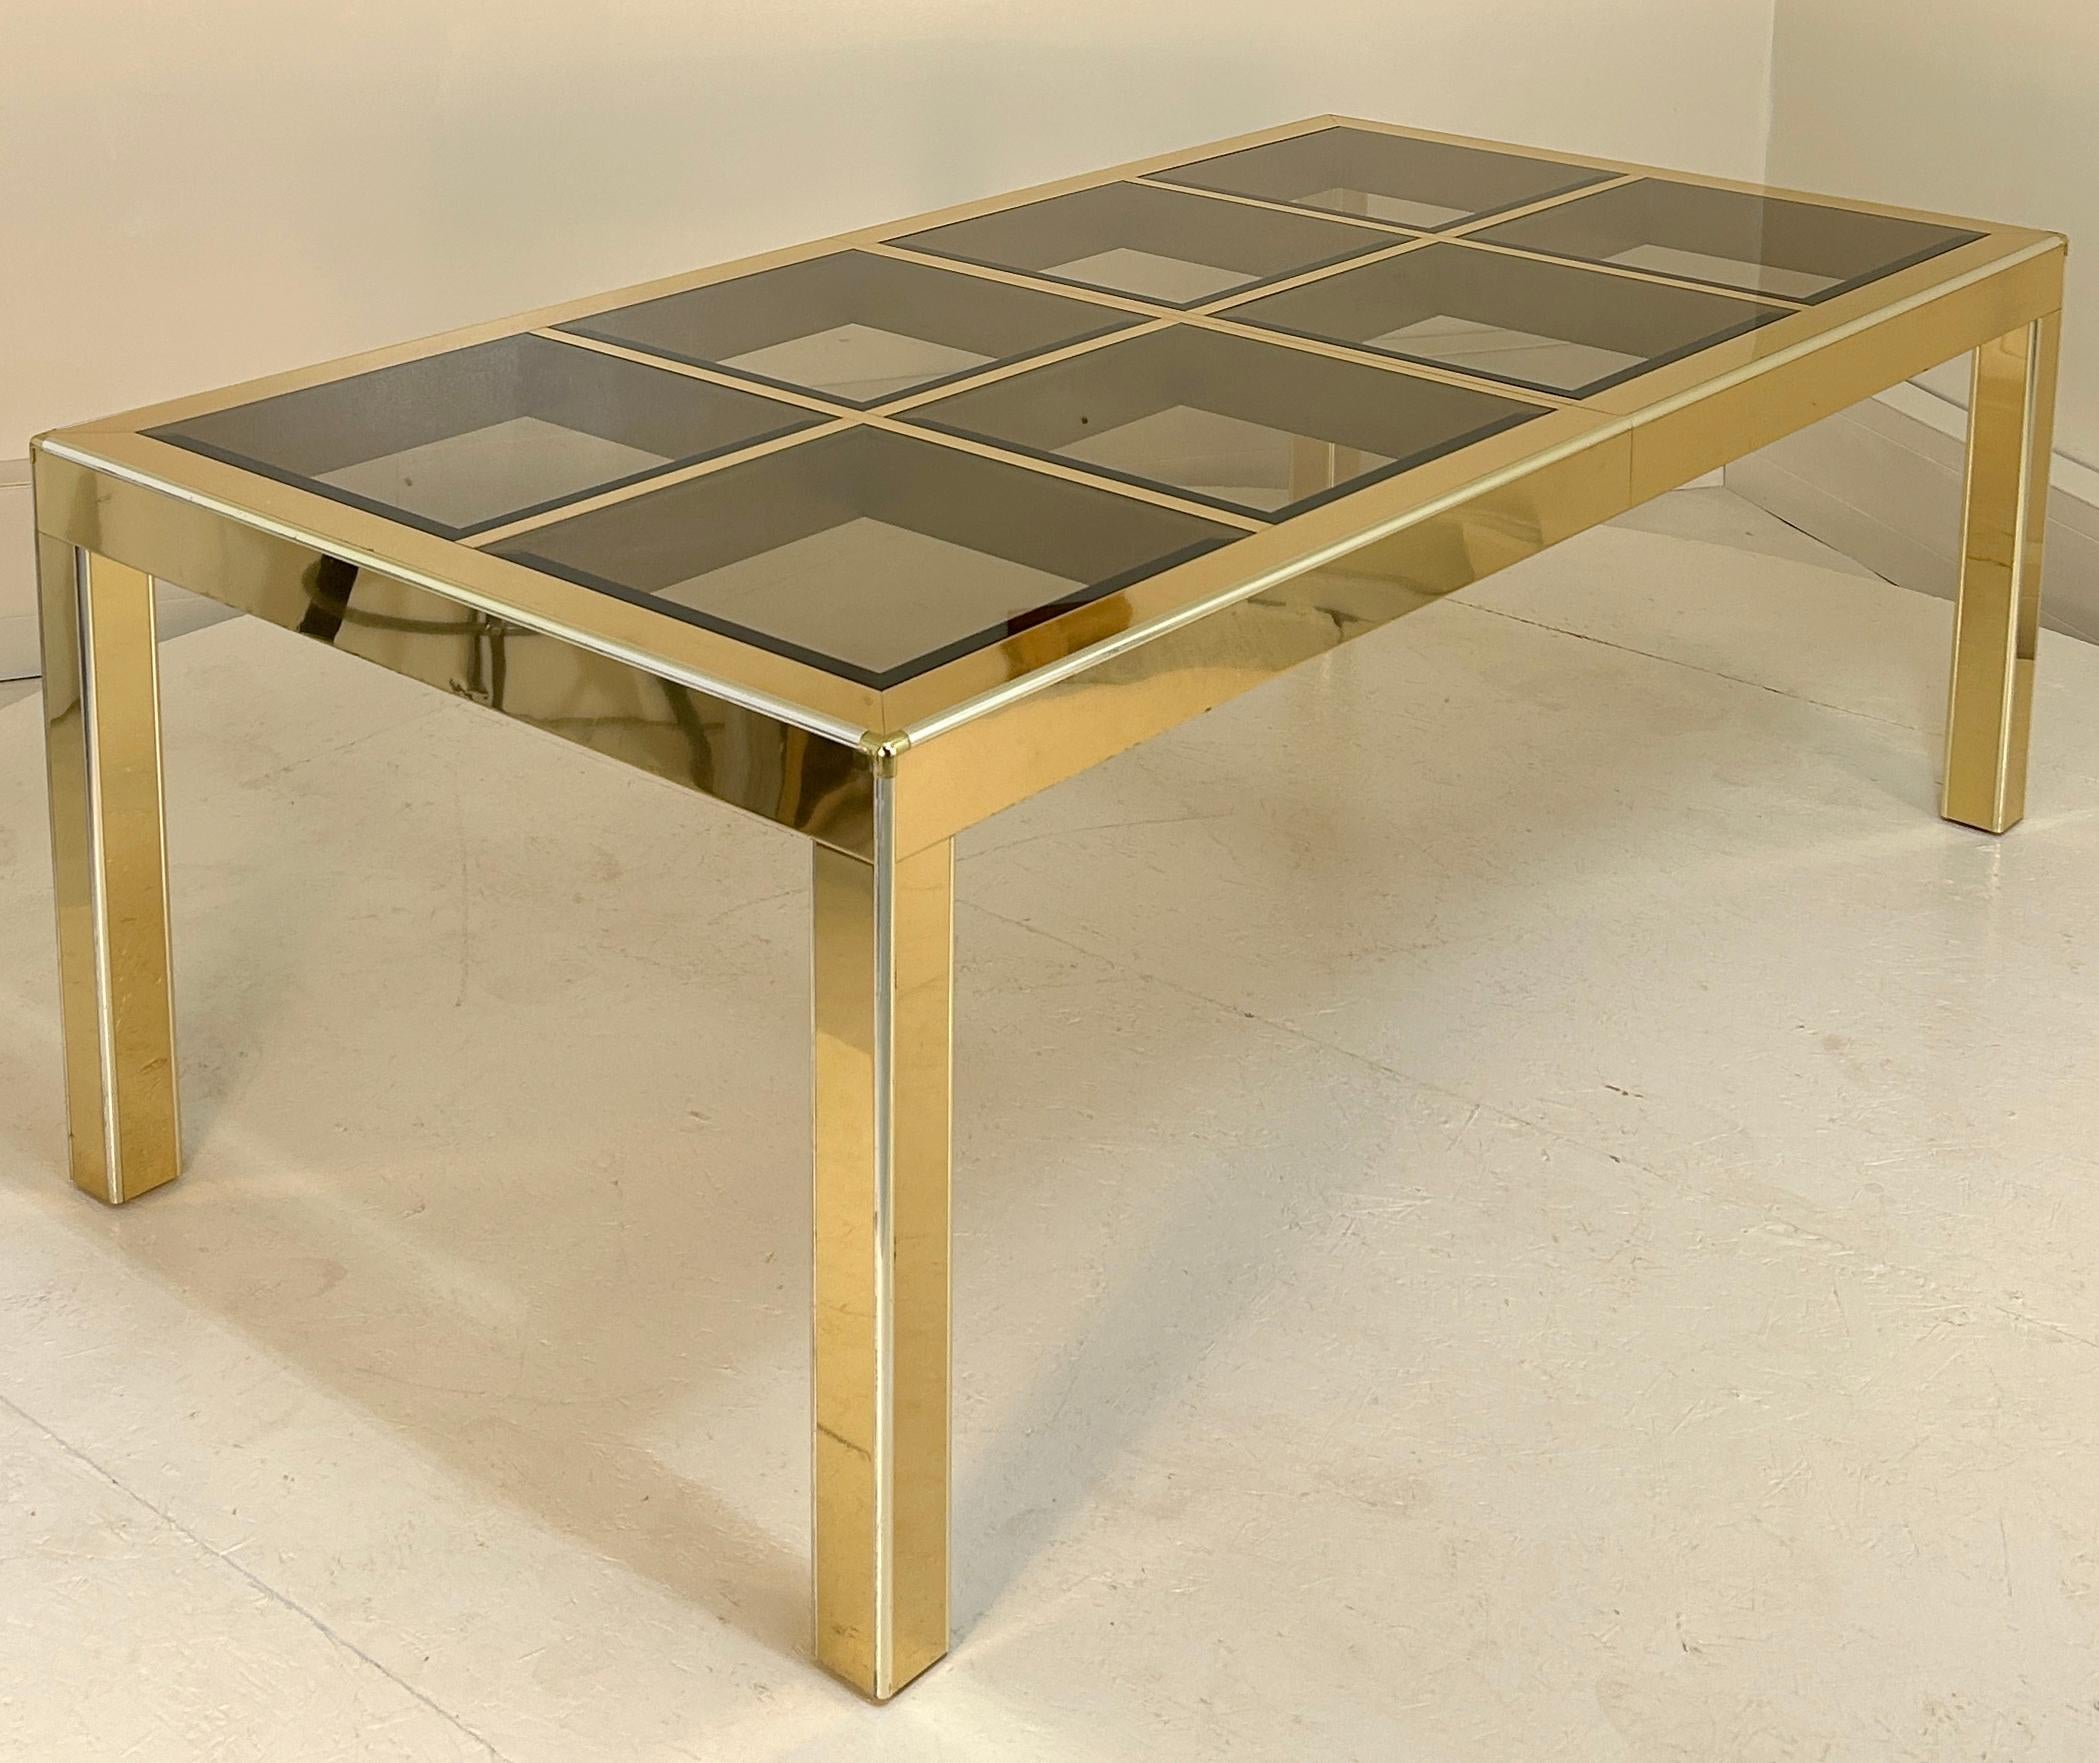 29.5 inches high by 81 inches long by 42.5 wide. Seats 6-8. Parsons form dining table by Mastercraft of Grand Rapids clad in brass sheet with brass edge trim and bevelled glass inserts Glass is tinted This table comes with no leaves although it is